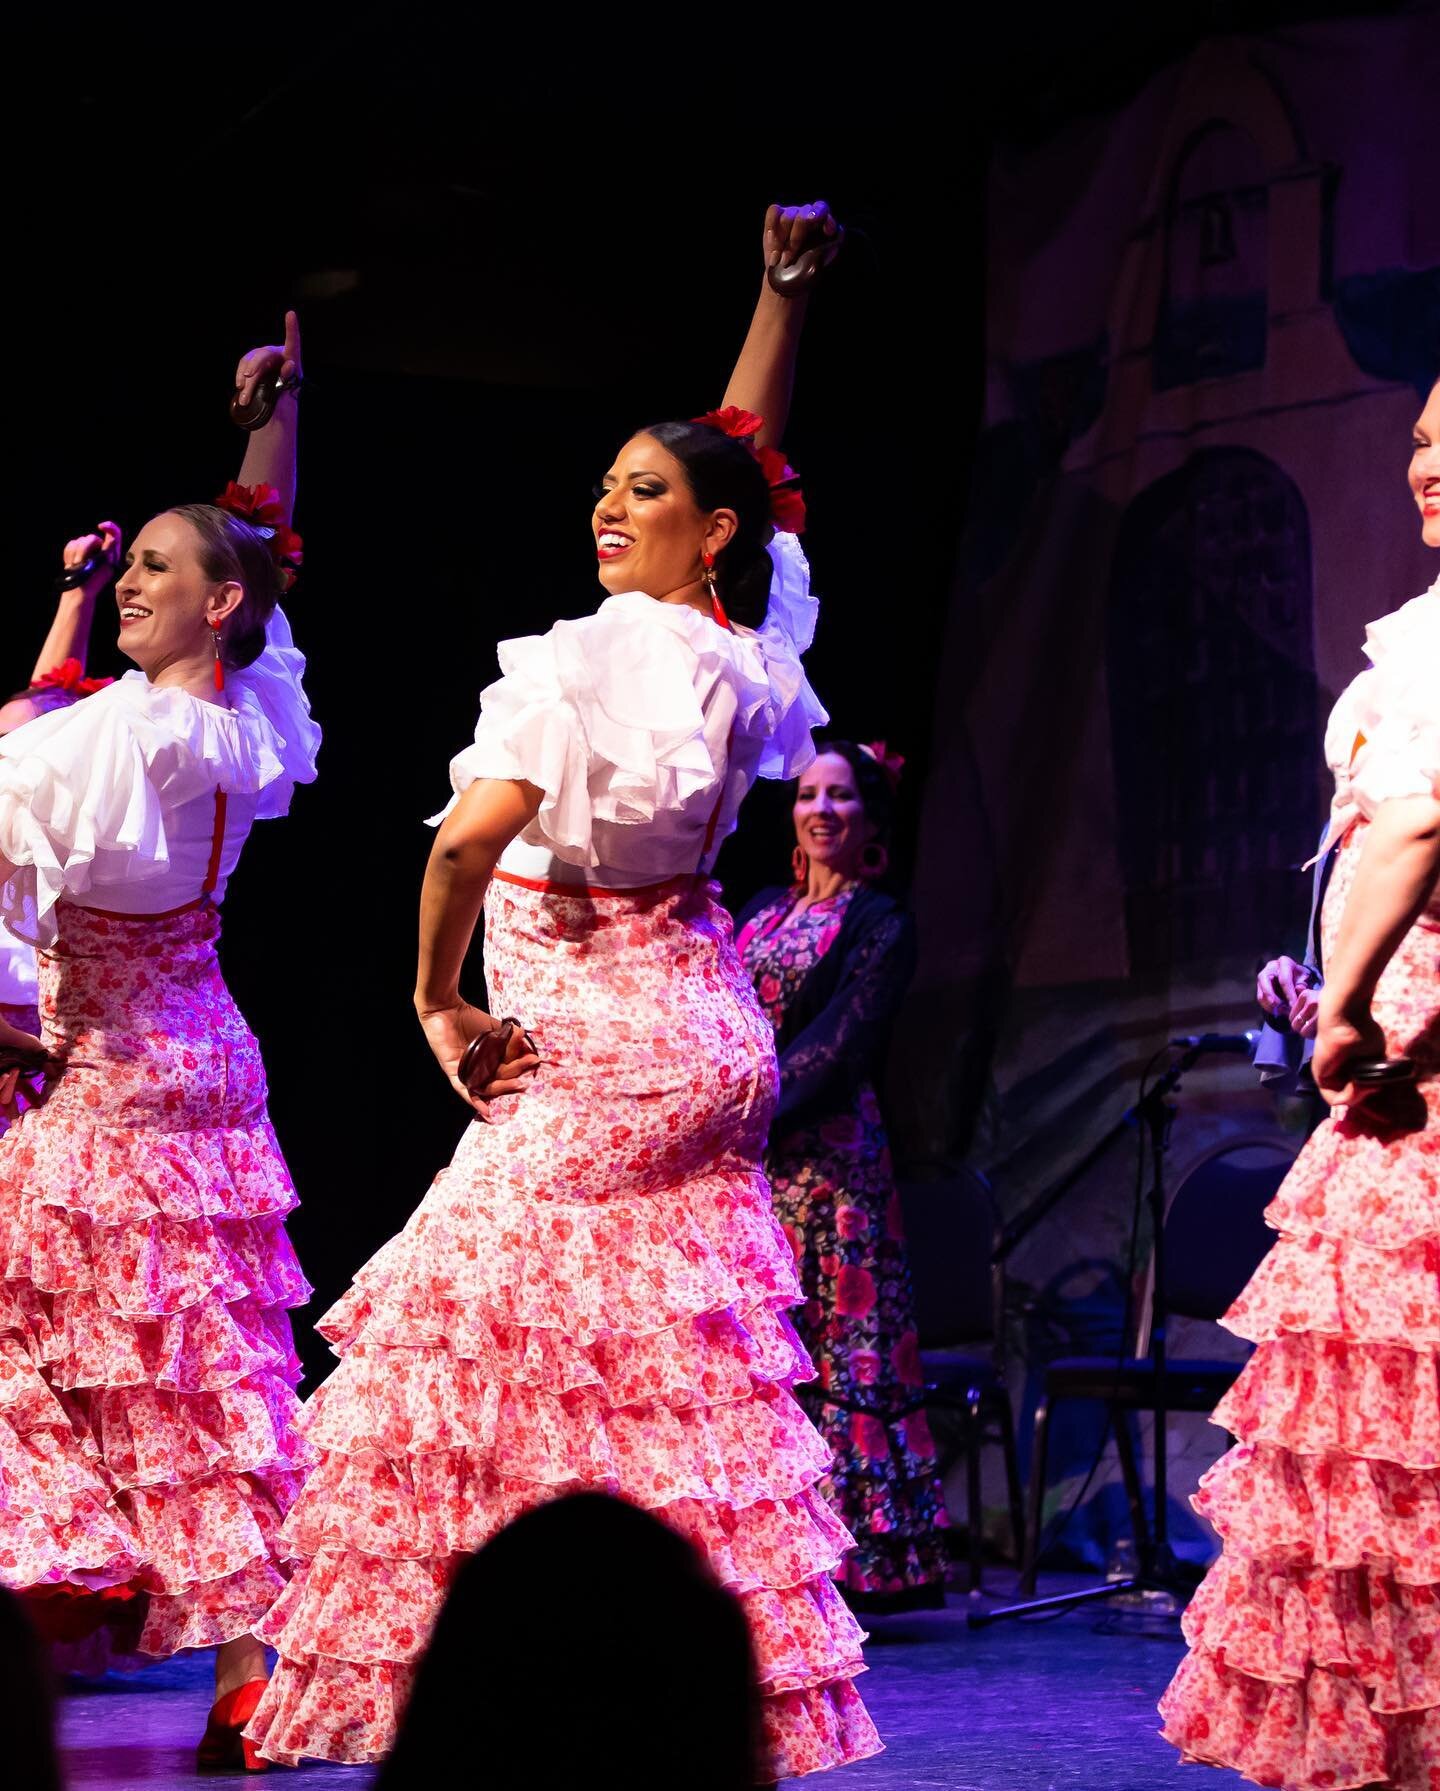 Stunning captures by @kari.r.frey from our Valentines a la Flamenca show this past February! #stlflamenco #flamencostl #flamencodance